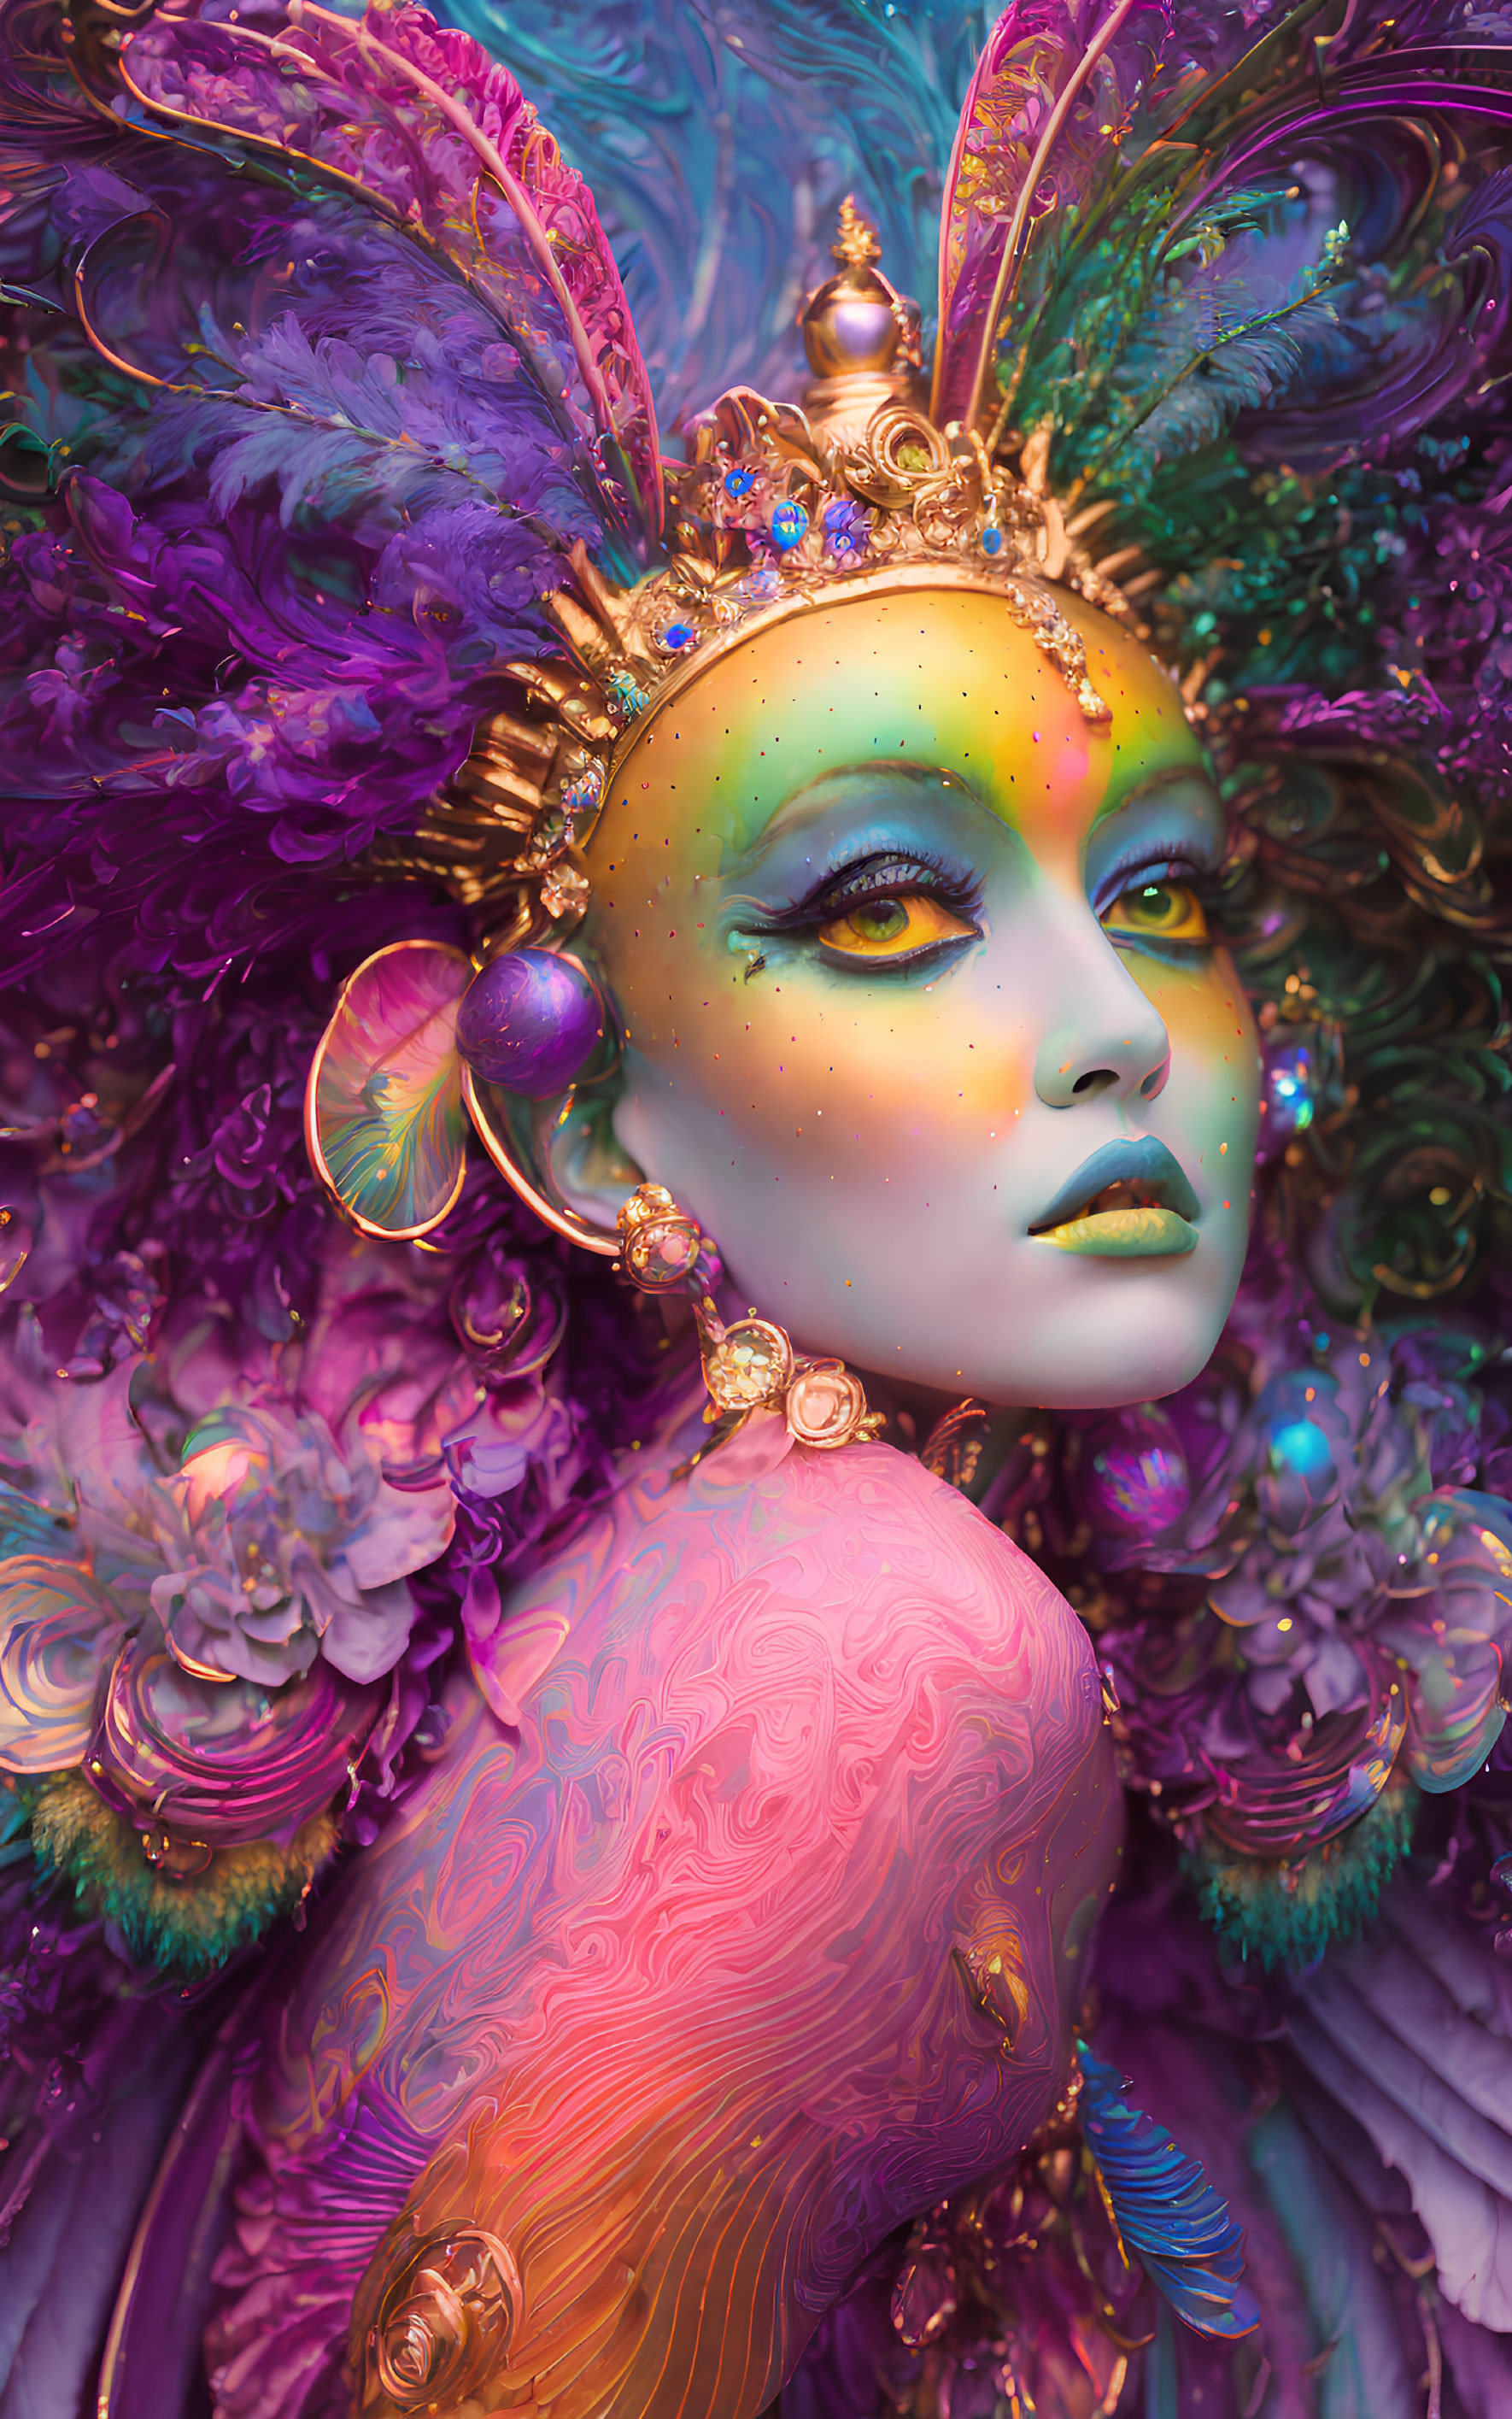 Colorful portrait of person with vibrant makeup and elaborate headdress against purple floral background